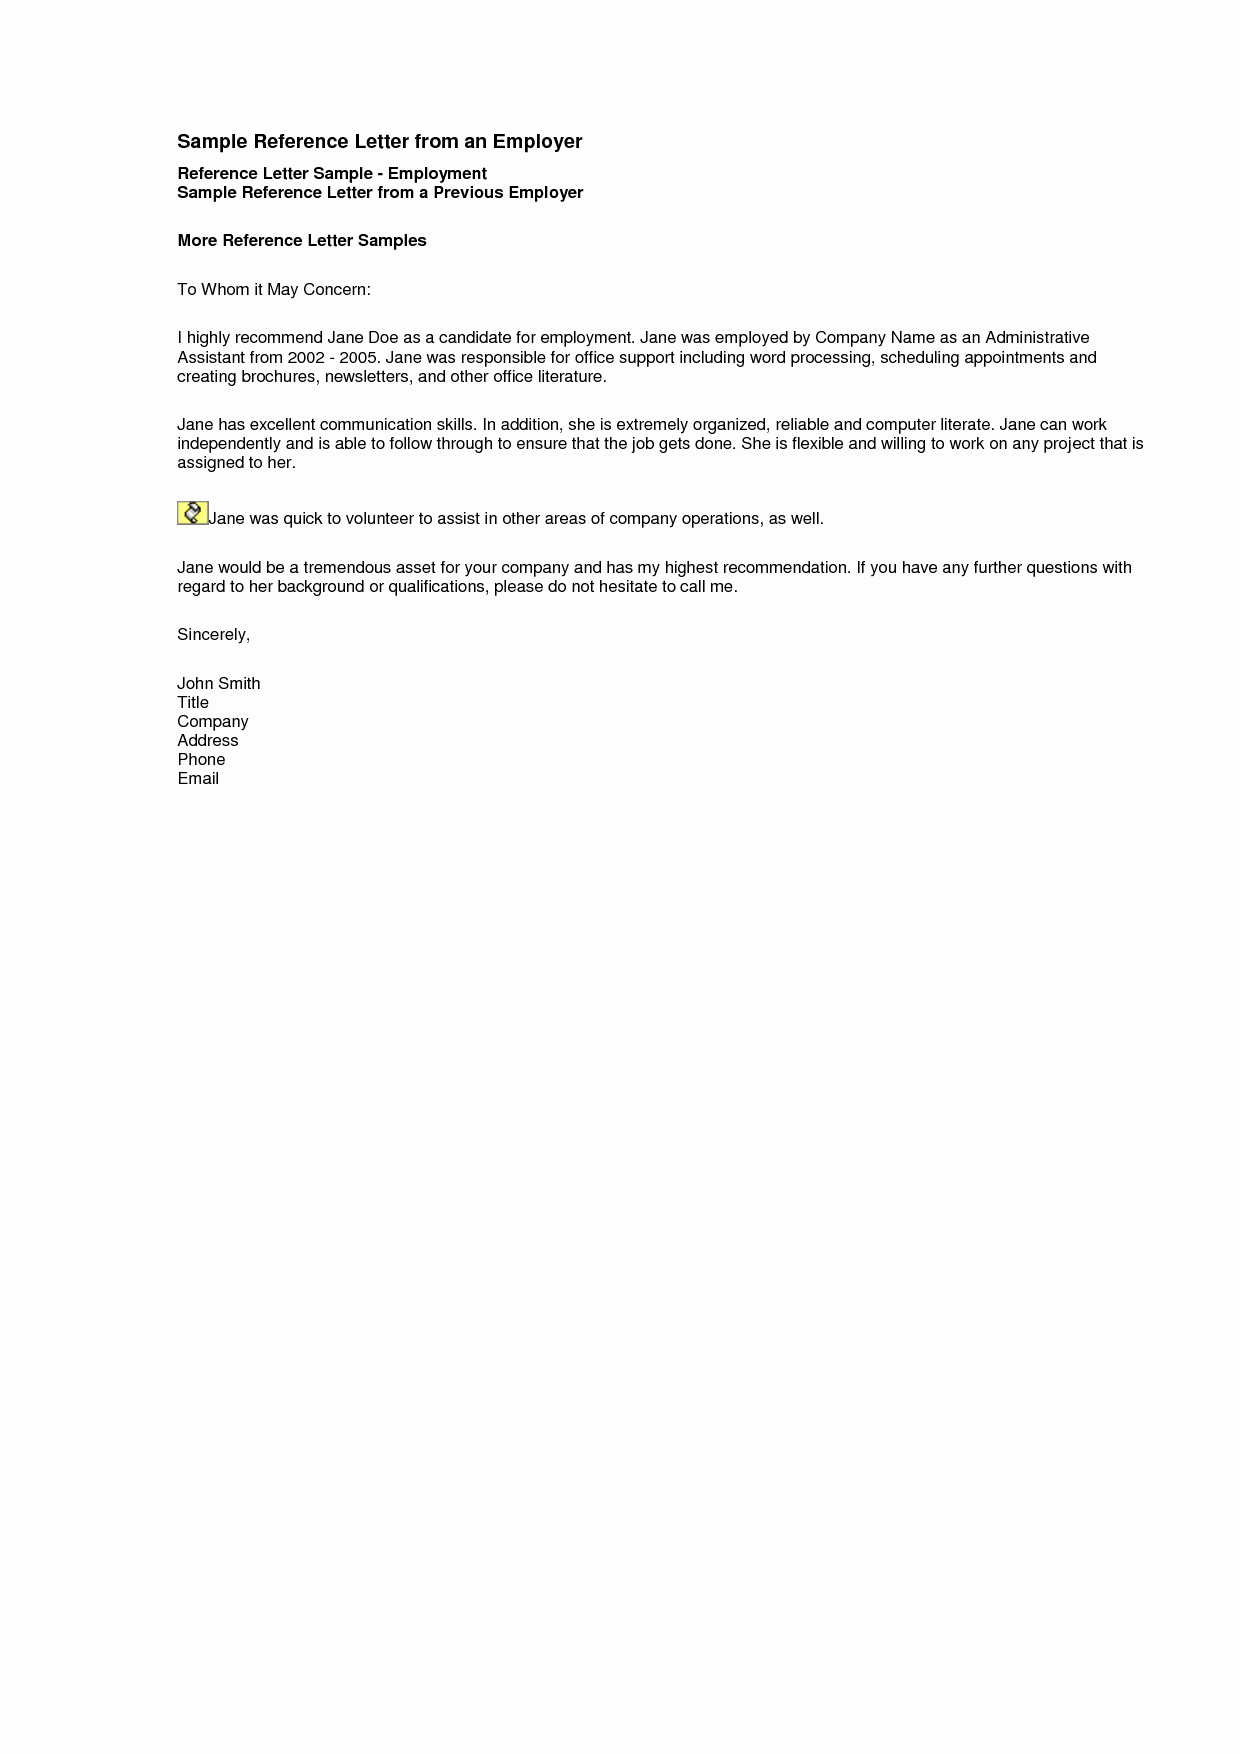 Sample Reference Letter for Employment